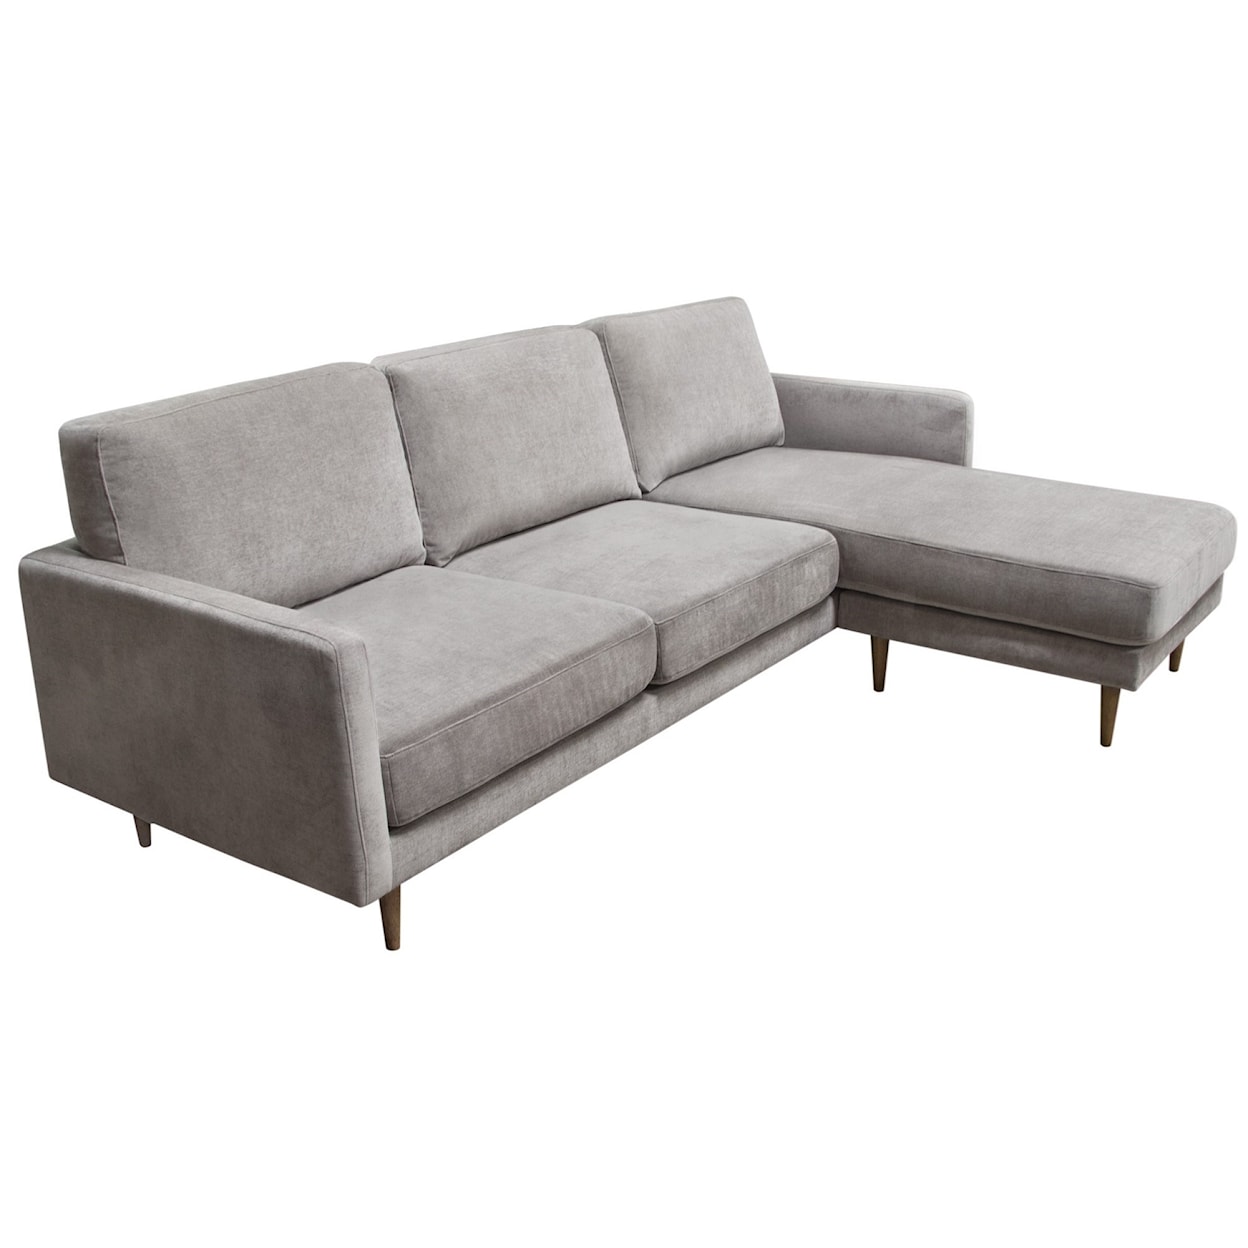 Diamond Sofa Furniture Kelsey Reversible Chaise Sectional